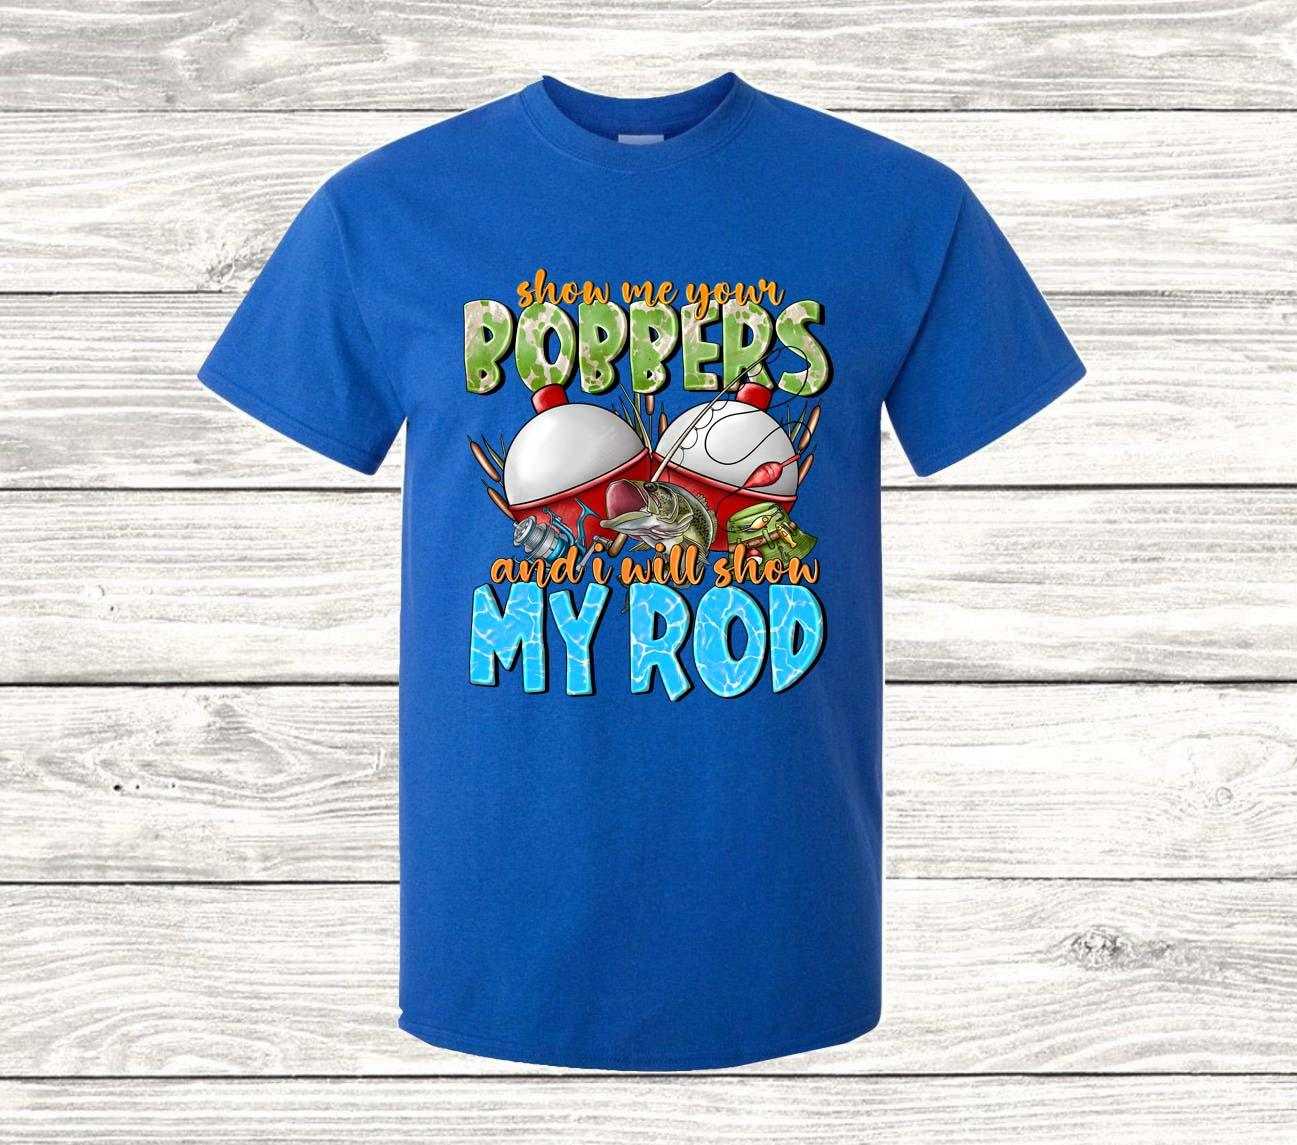 Show Me Your Bobbers, I Will Show My Rod T Shirt, Fishing T Shirt - Imagine With Aloha